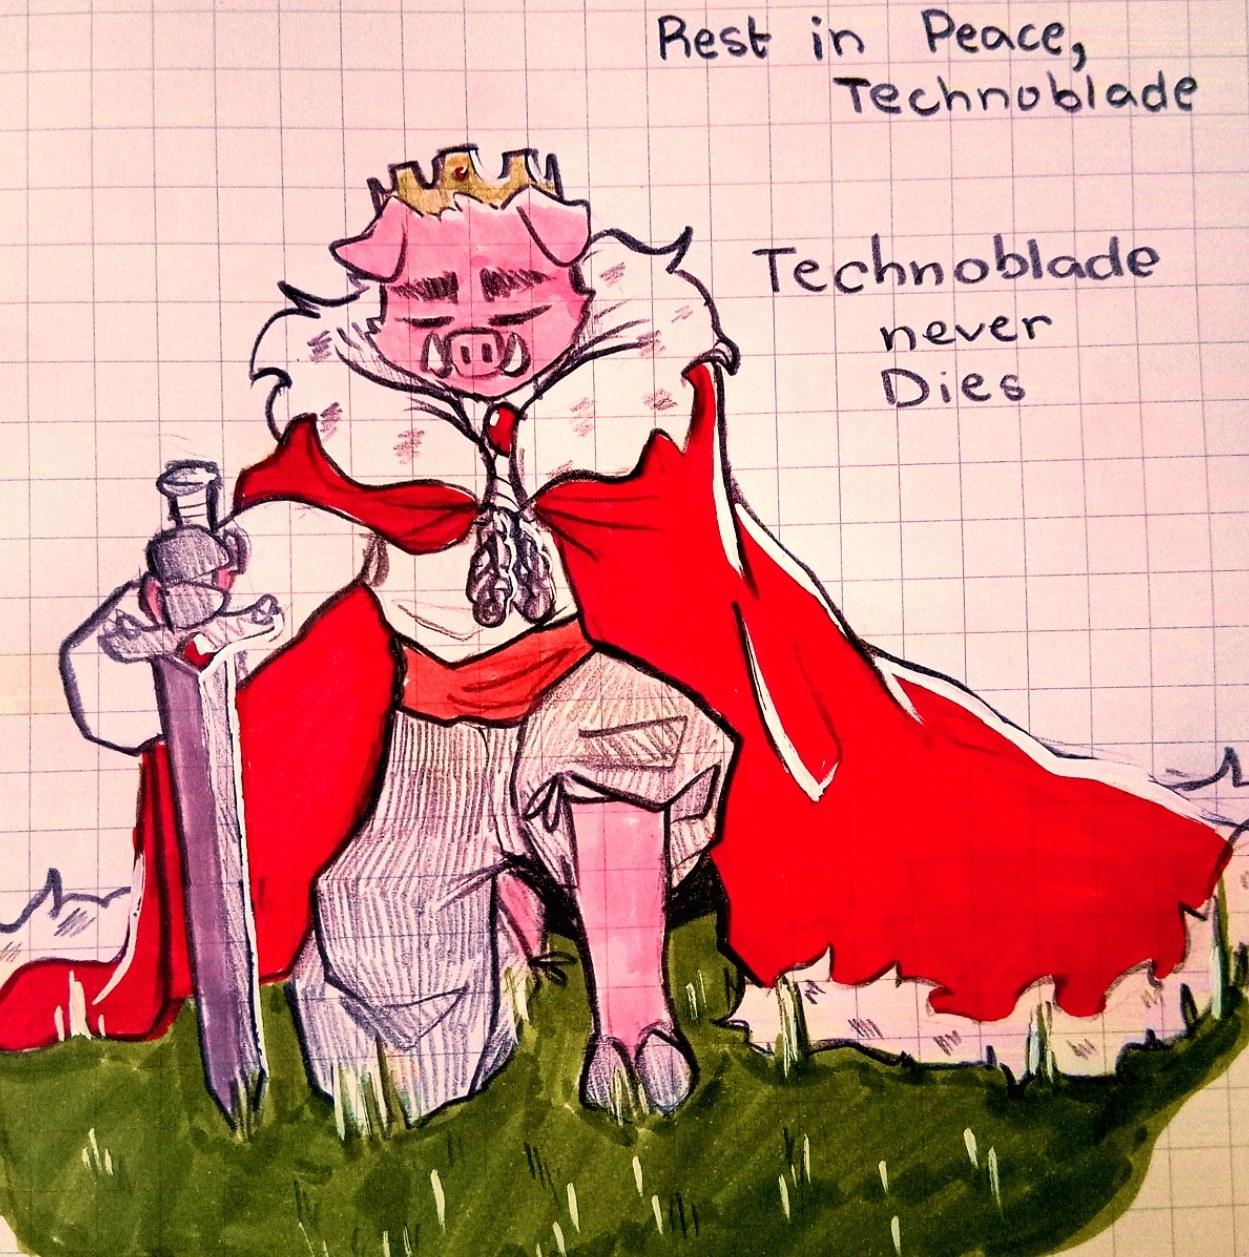 It's been 365 days since we lost technoblade. Technoblade never dies :  r/Minecraft